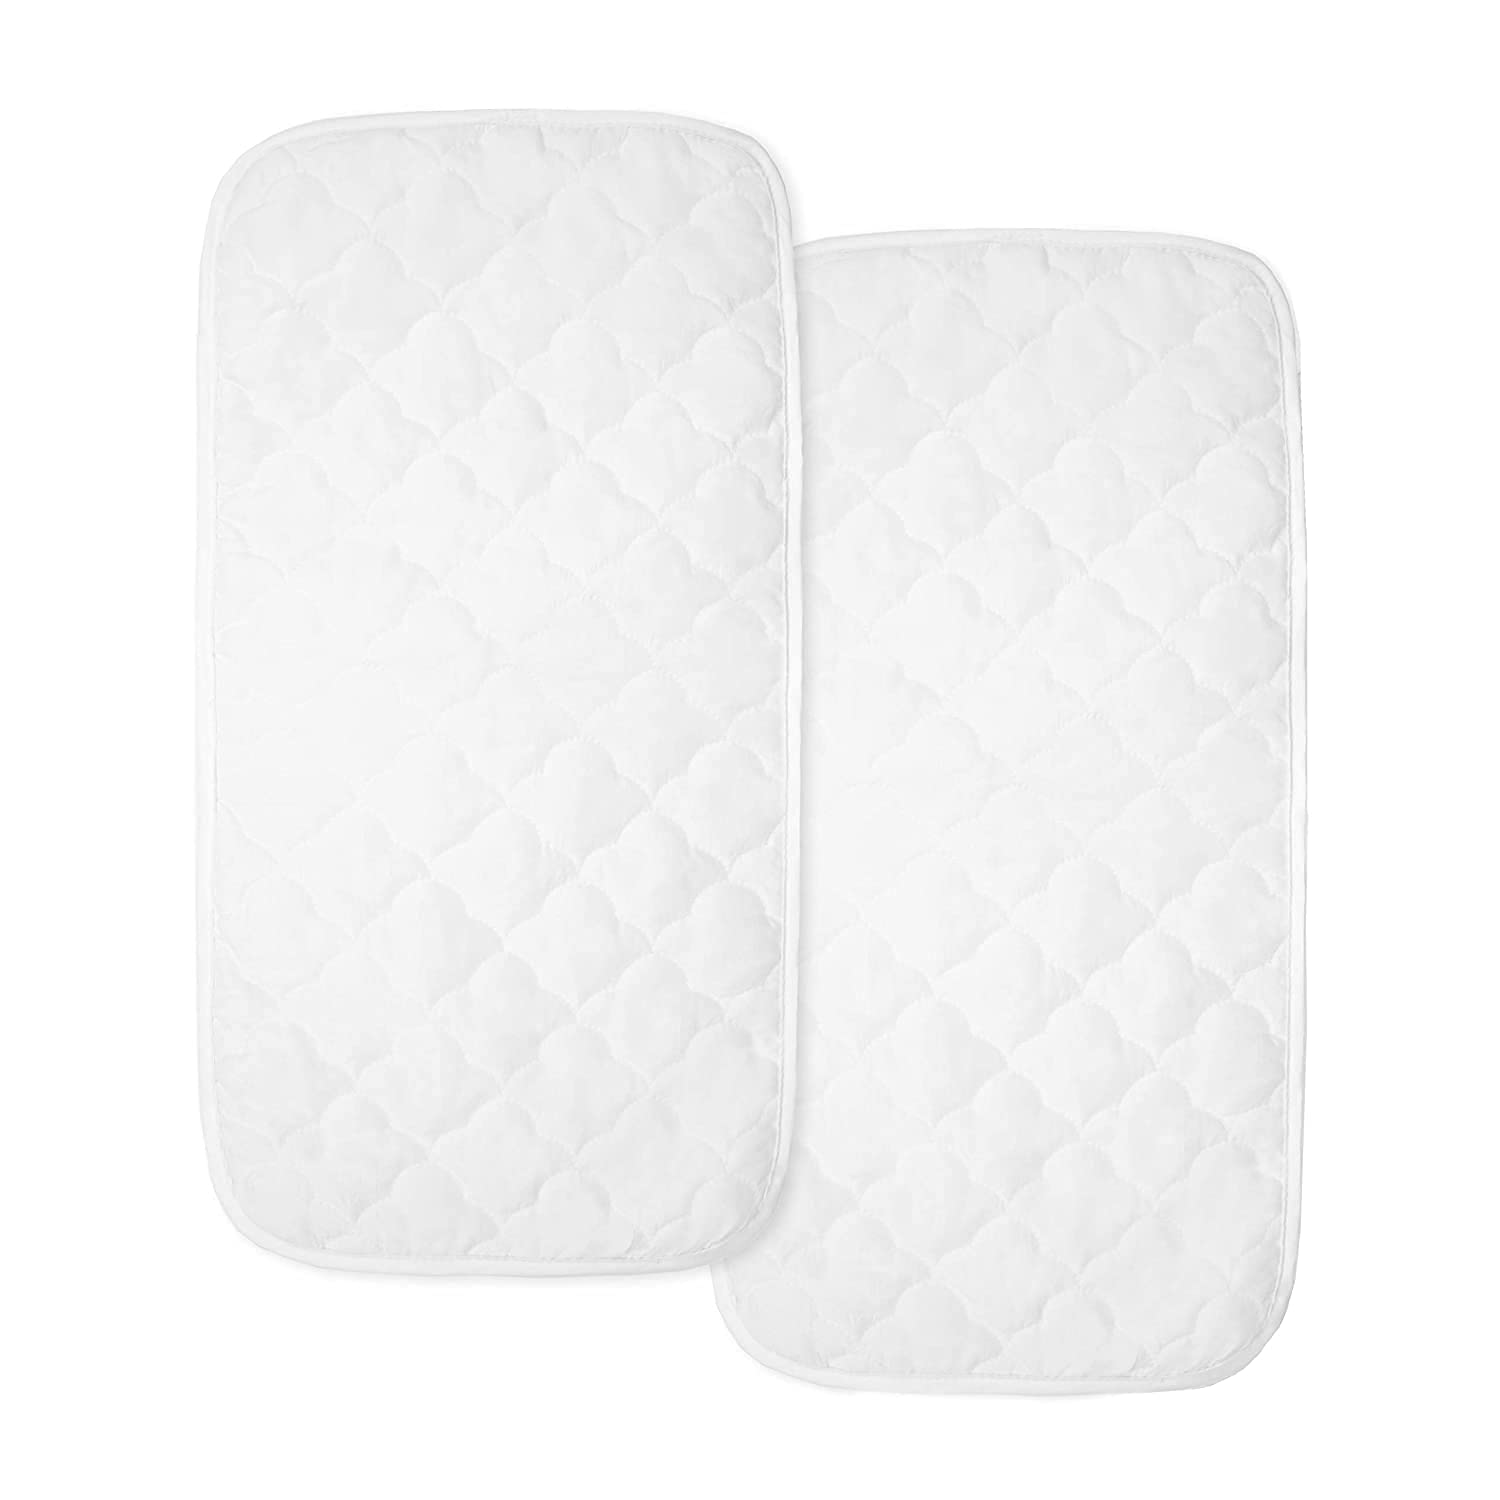 American Baby Company Changing Table Cover Set, 100% Cotton Fitted Changing Table Pad Cover Sheet (2 Pack) and Waterproof Changing Table Pad Liners (2 Pack), for Boys and Girls